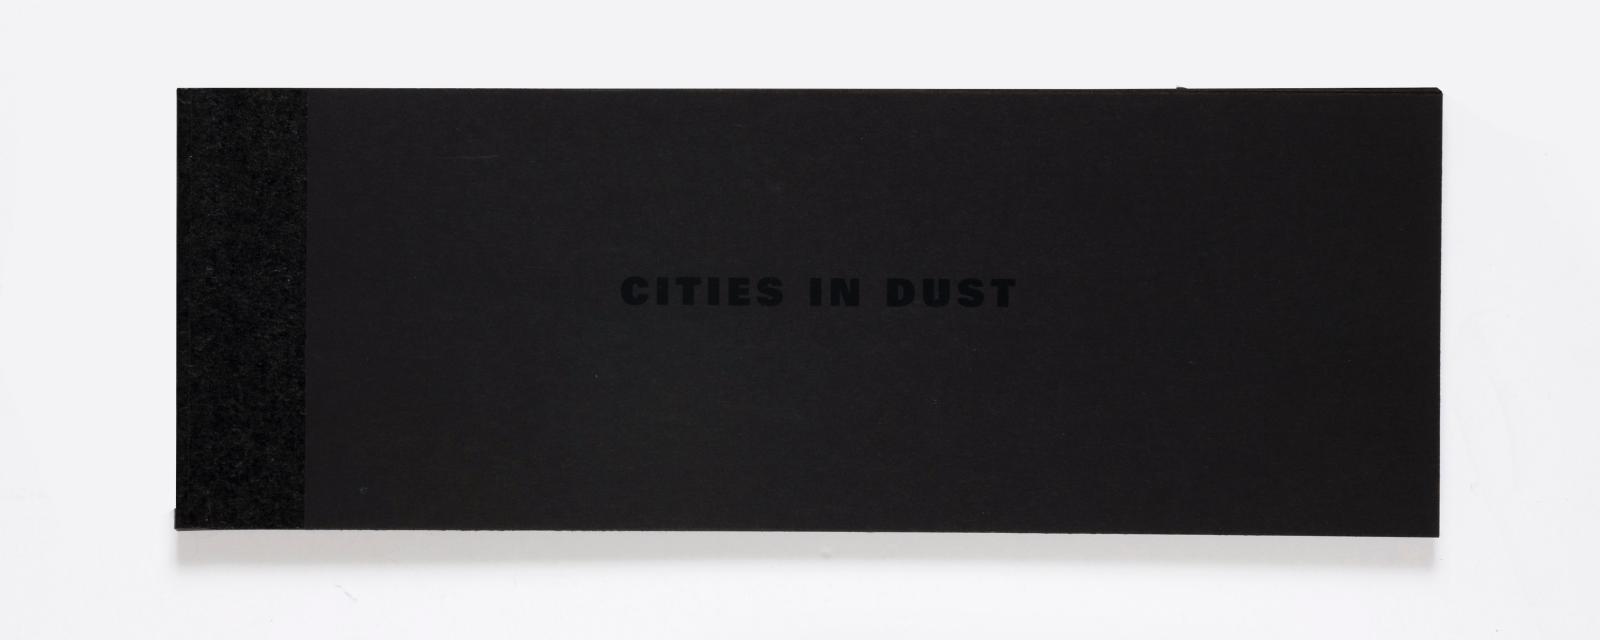 Cities in Dust Victor Blue Bronx Documentary Center, 2019